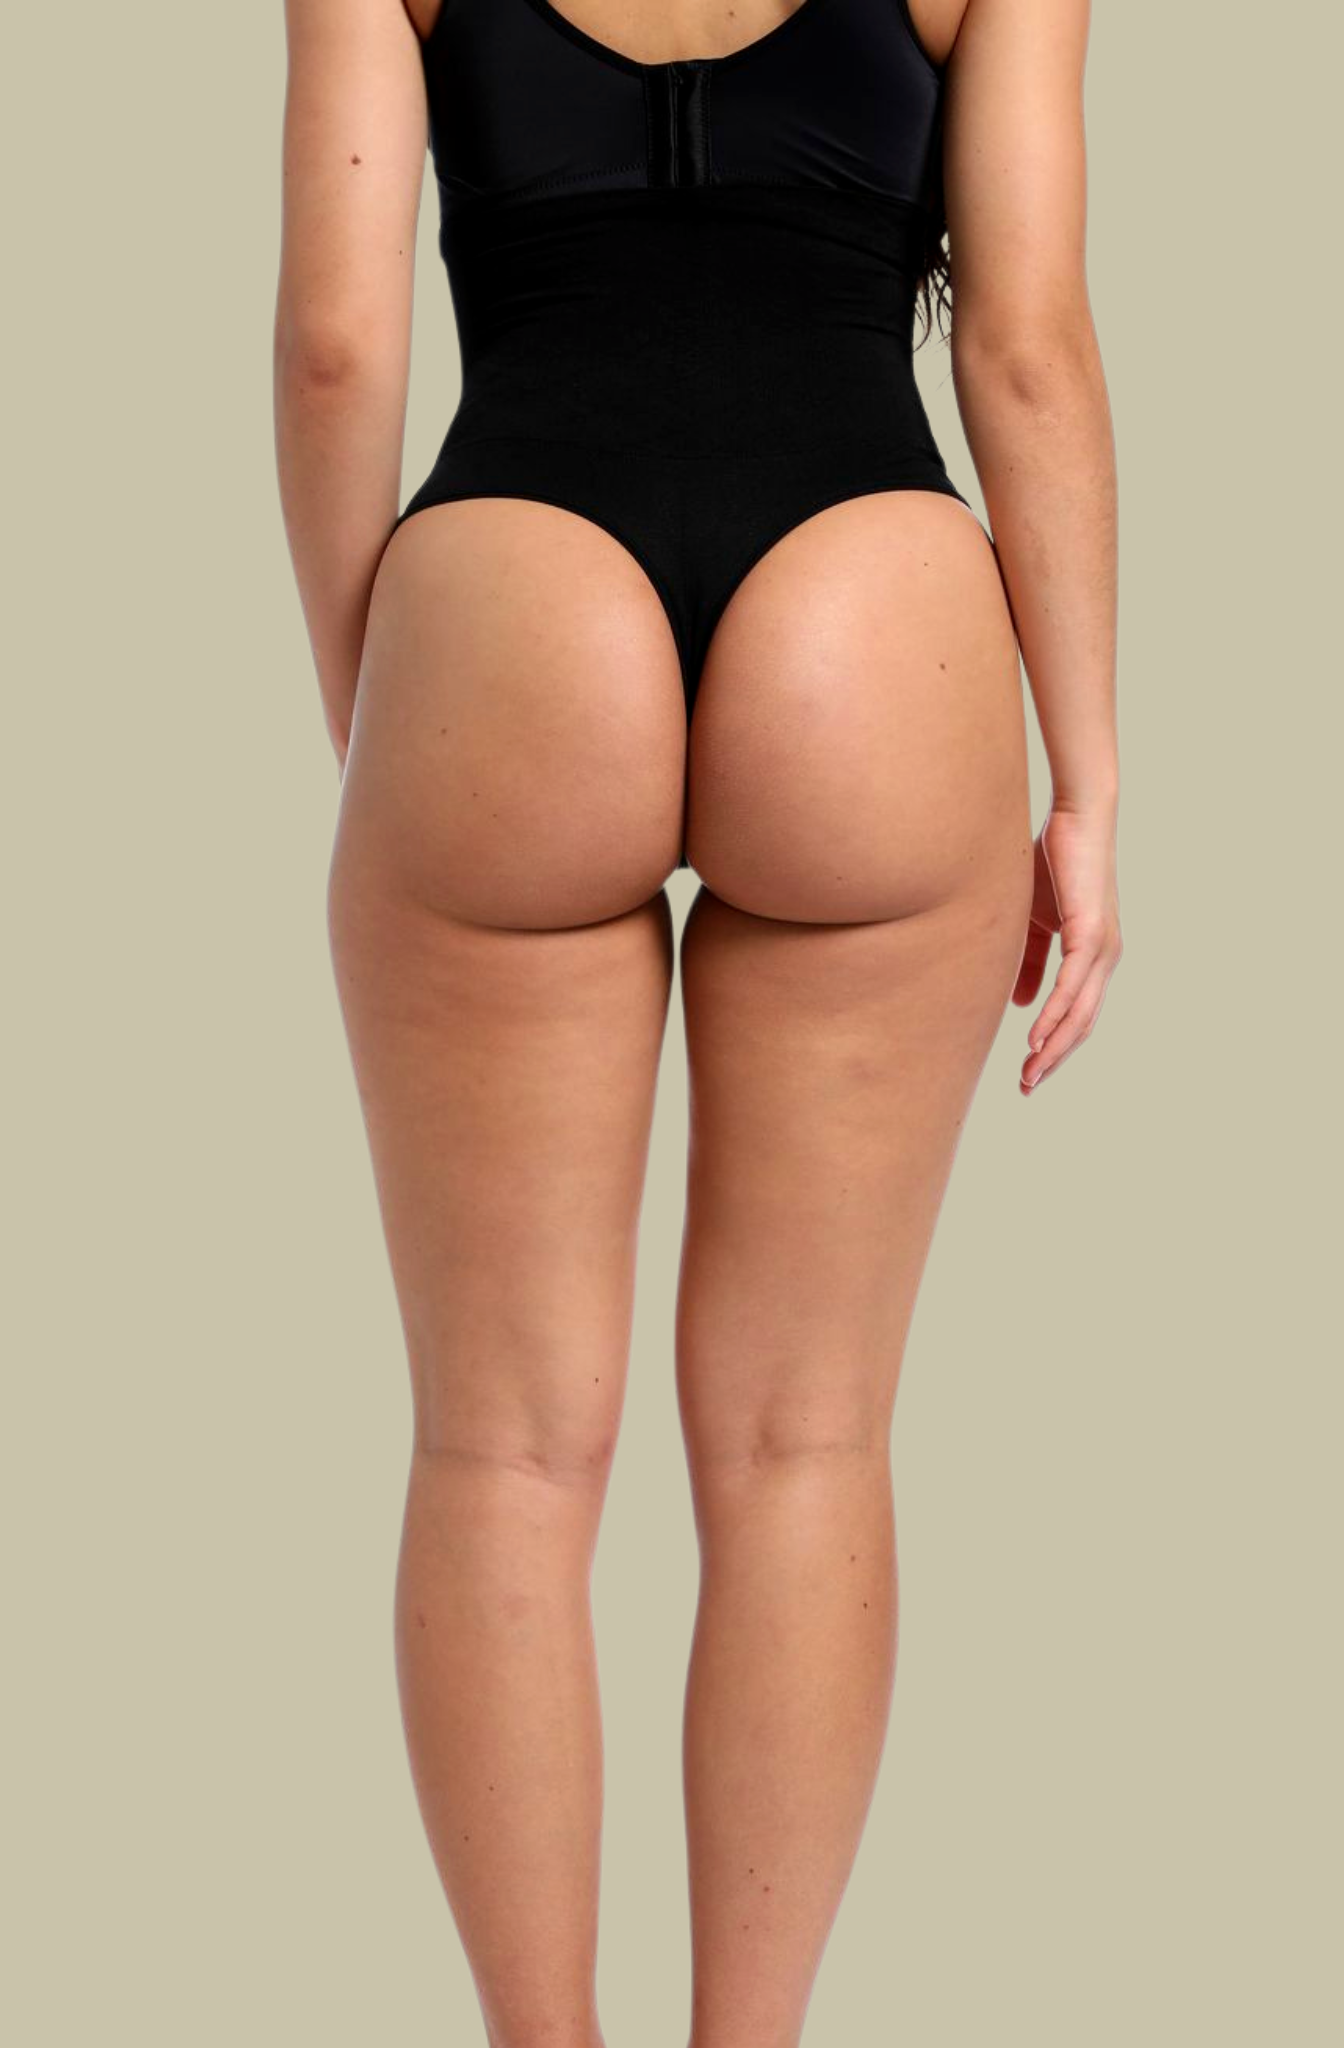 If you want your shapewear to truuuuly snatch everything in, this